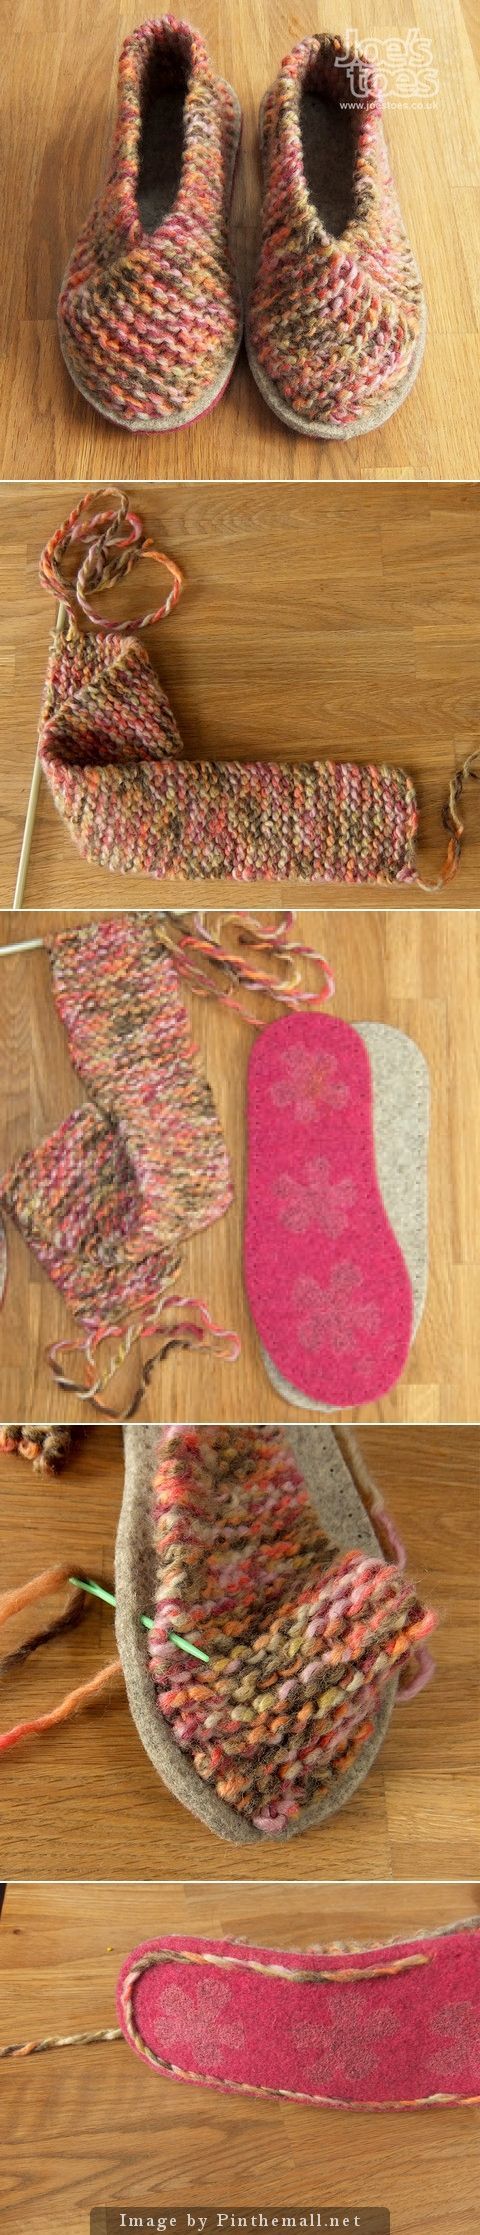 Knitting_Tutorial-How-to-make-Knitted-Garter-Stitch-Slippers.-This.jpg